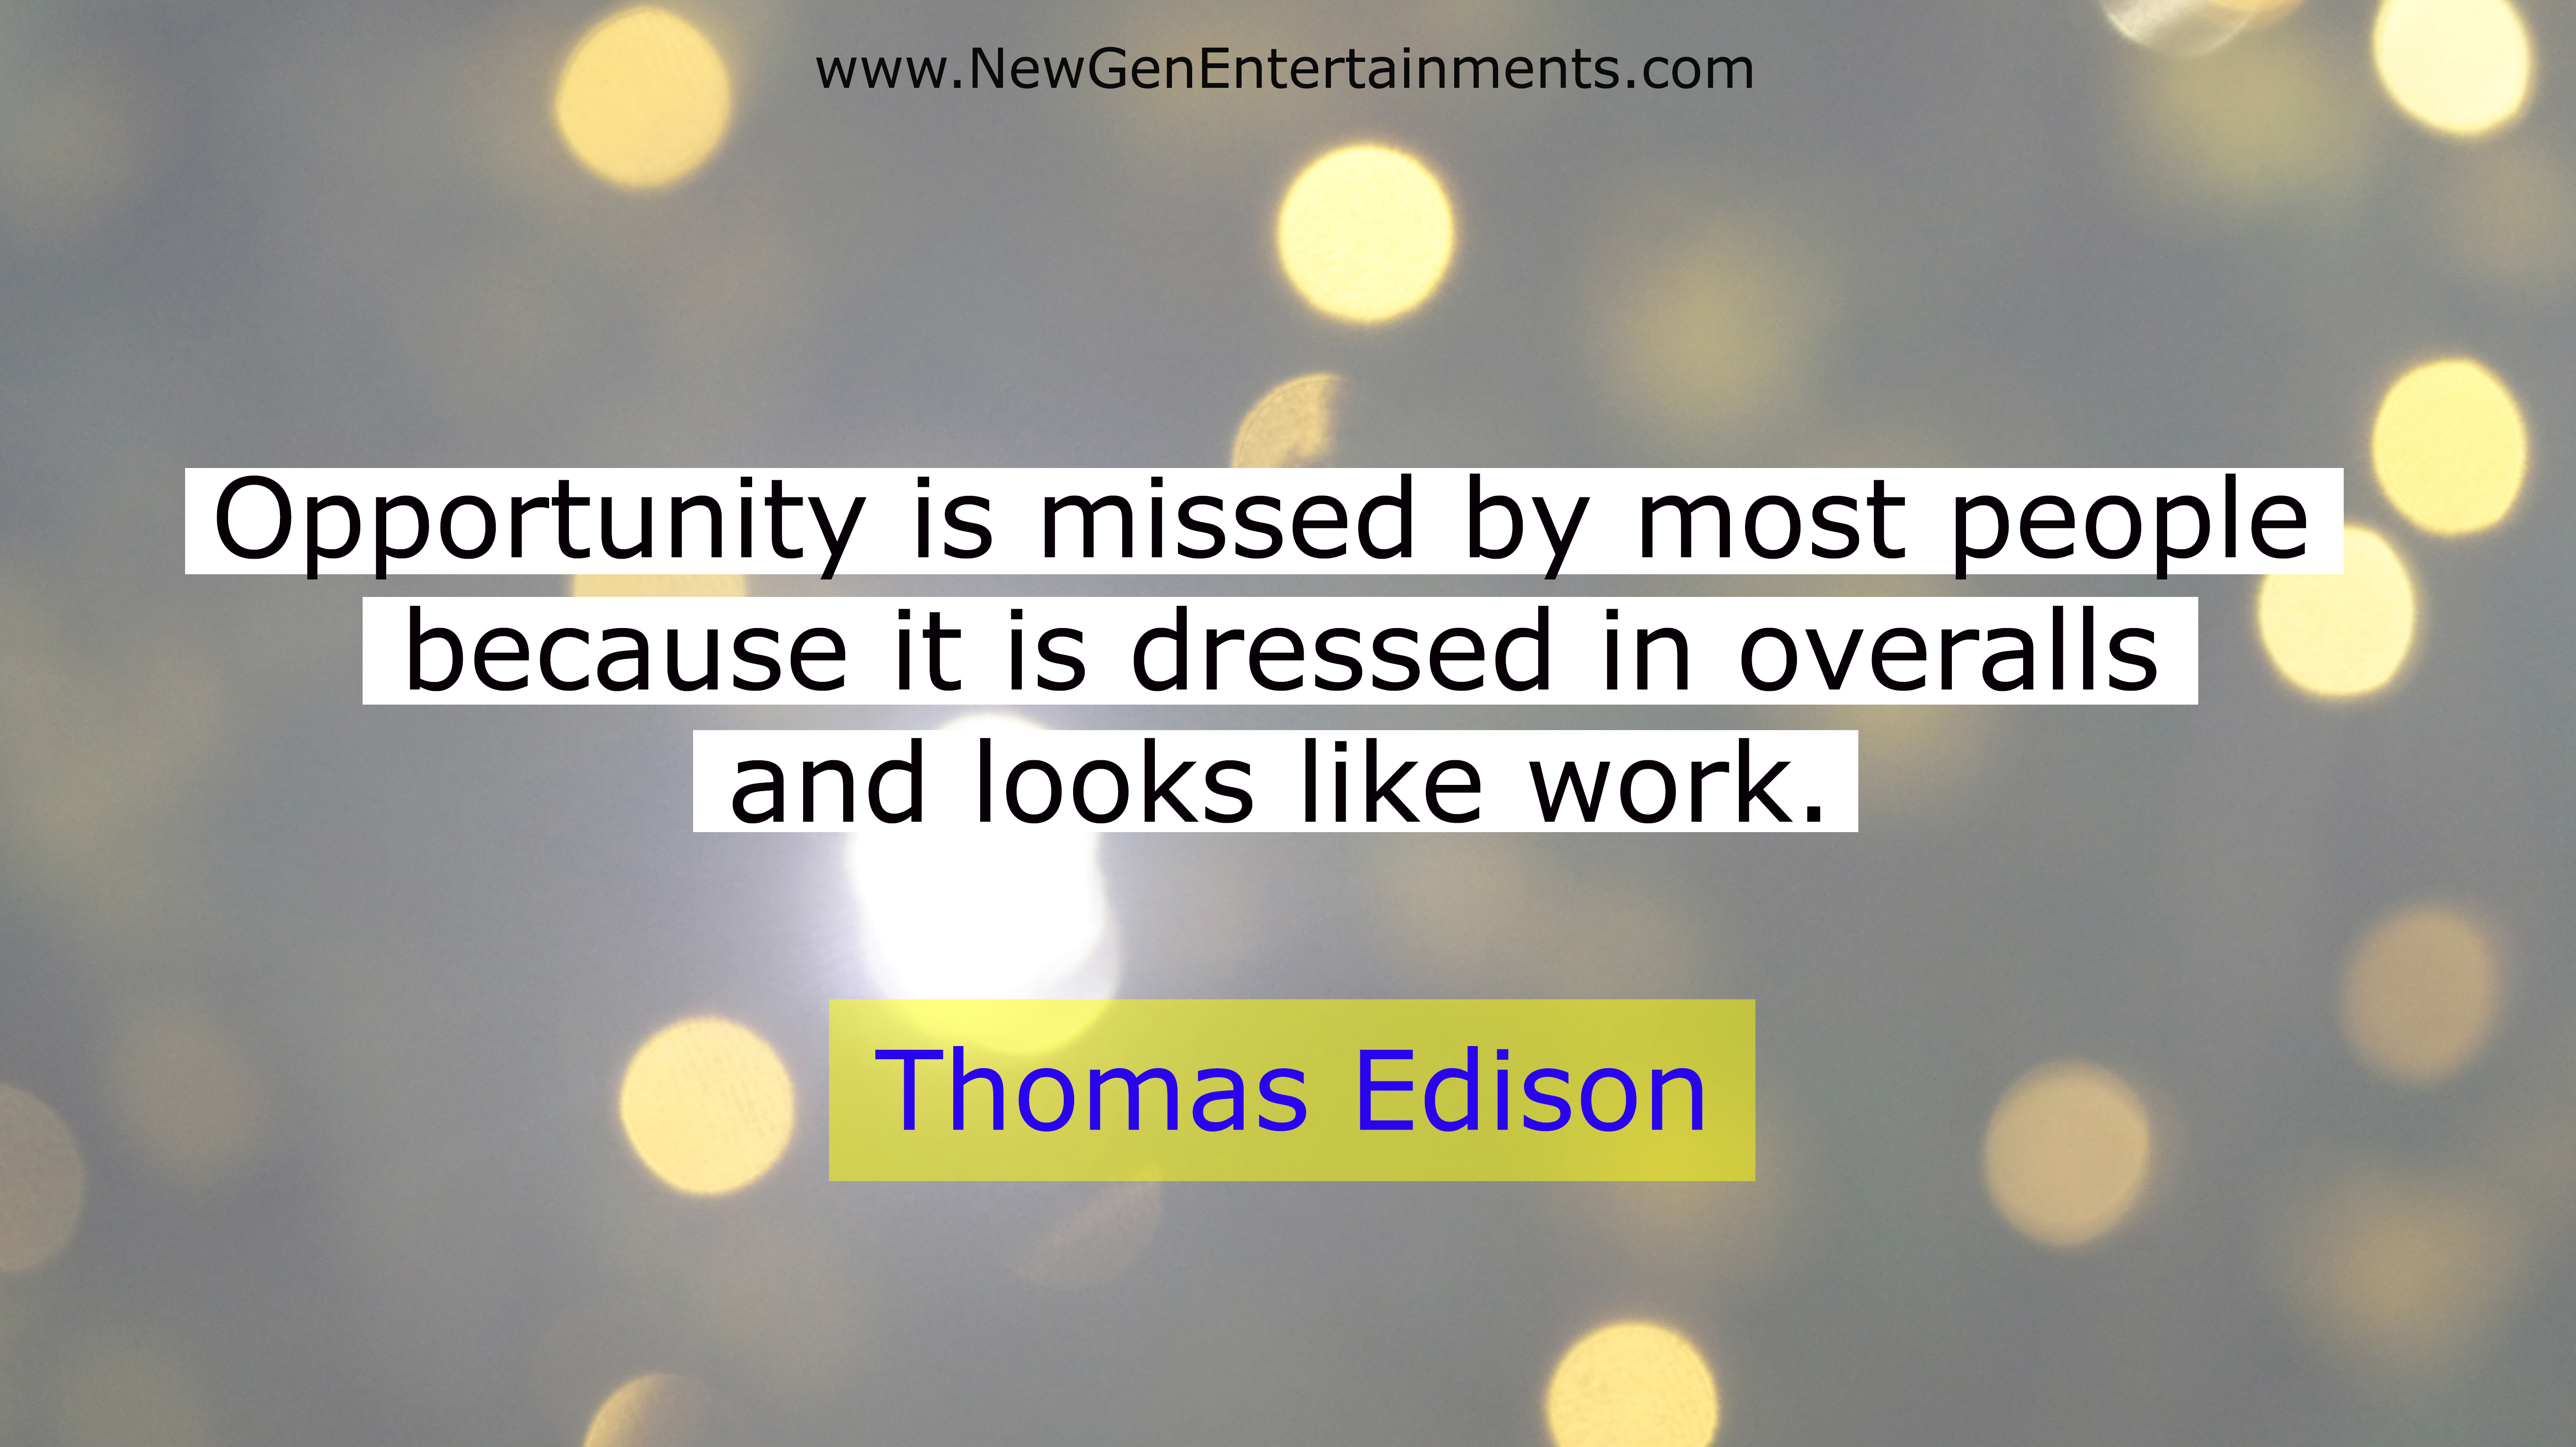 Opportunity is missed by most people because it is dressed in overalls and looks like work